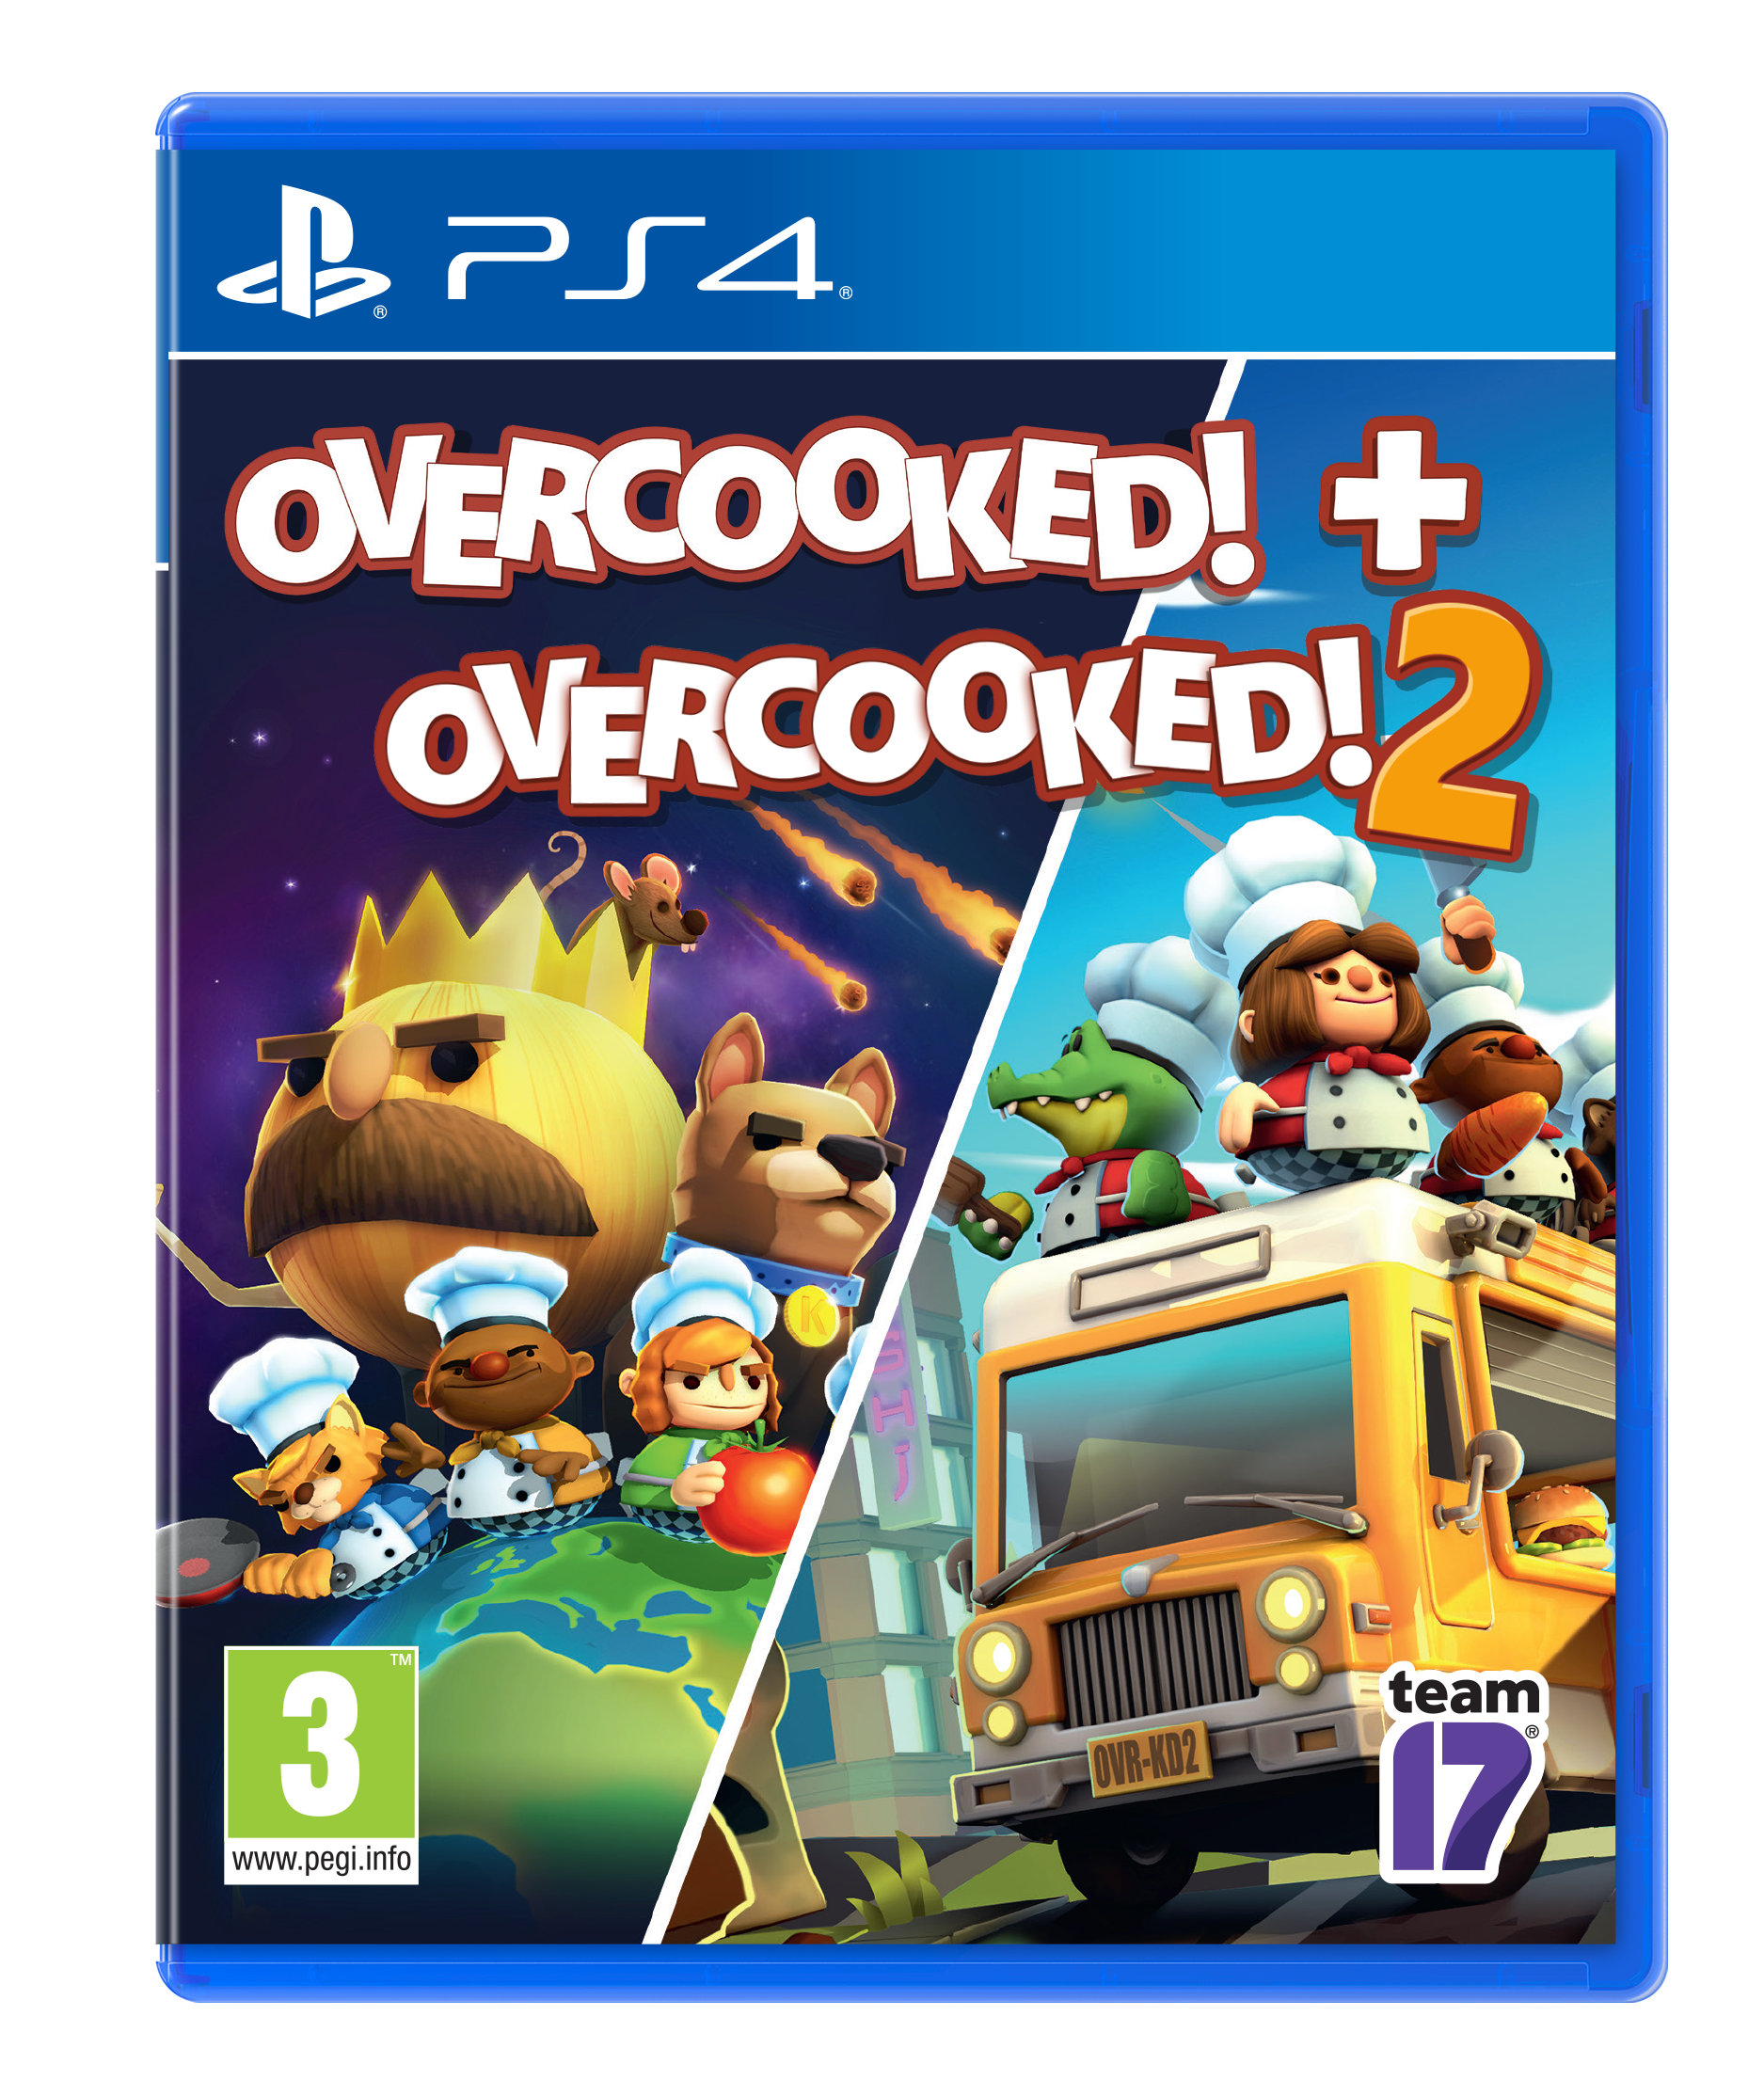 Overcooked! 2 free downloads